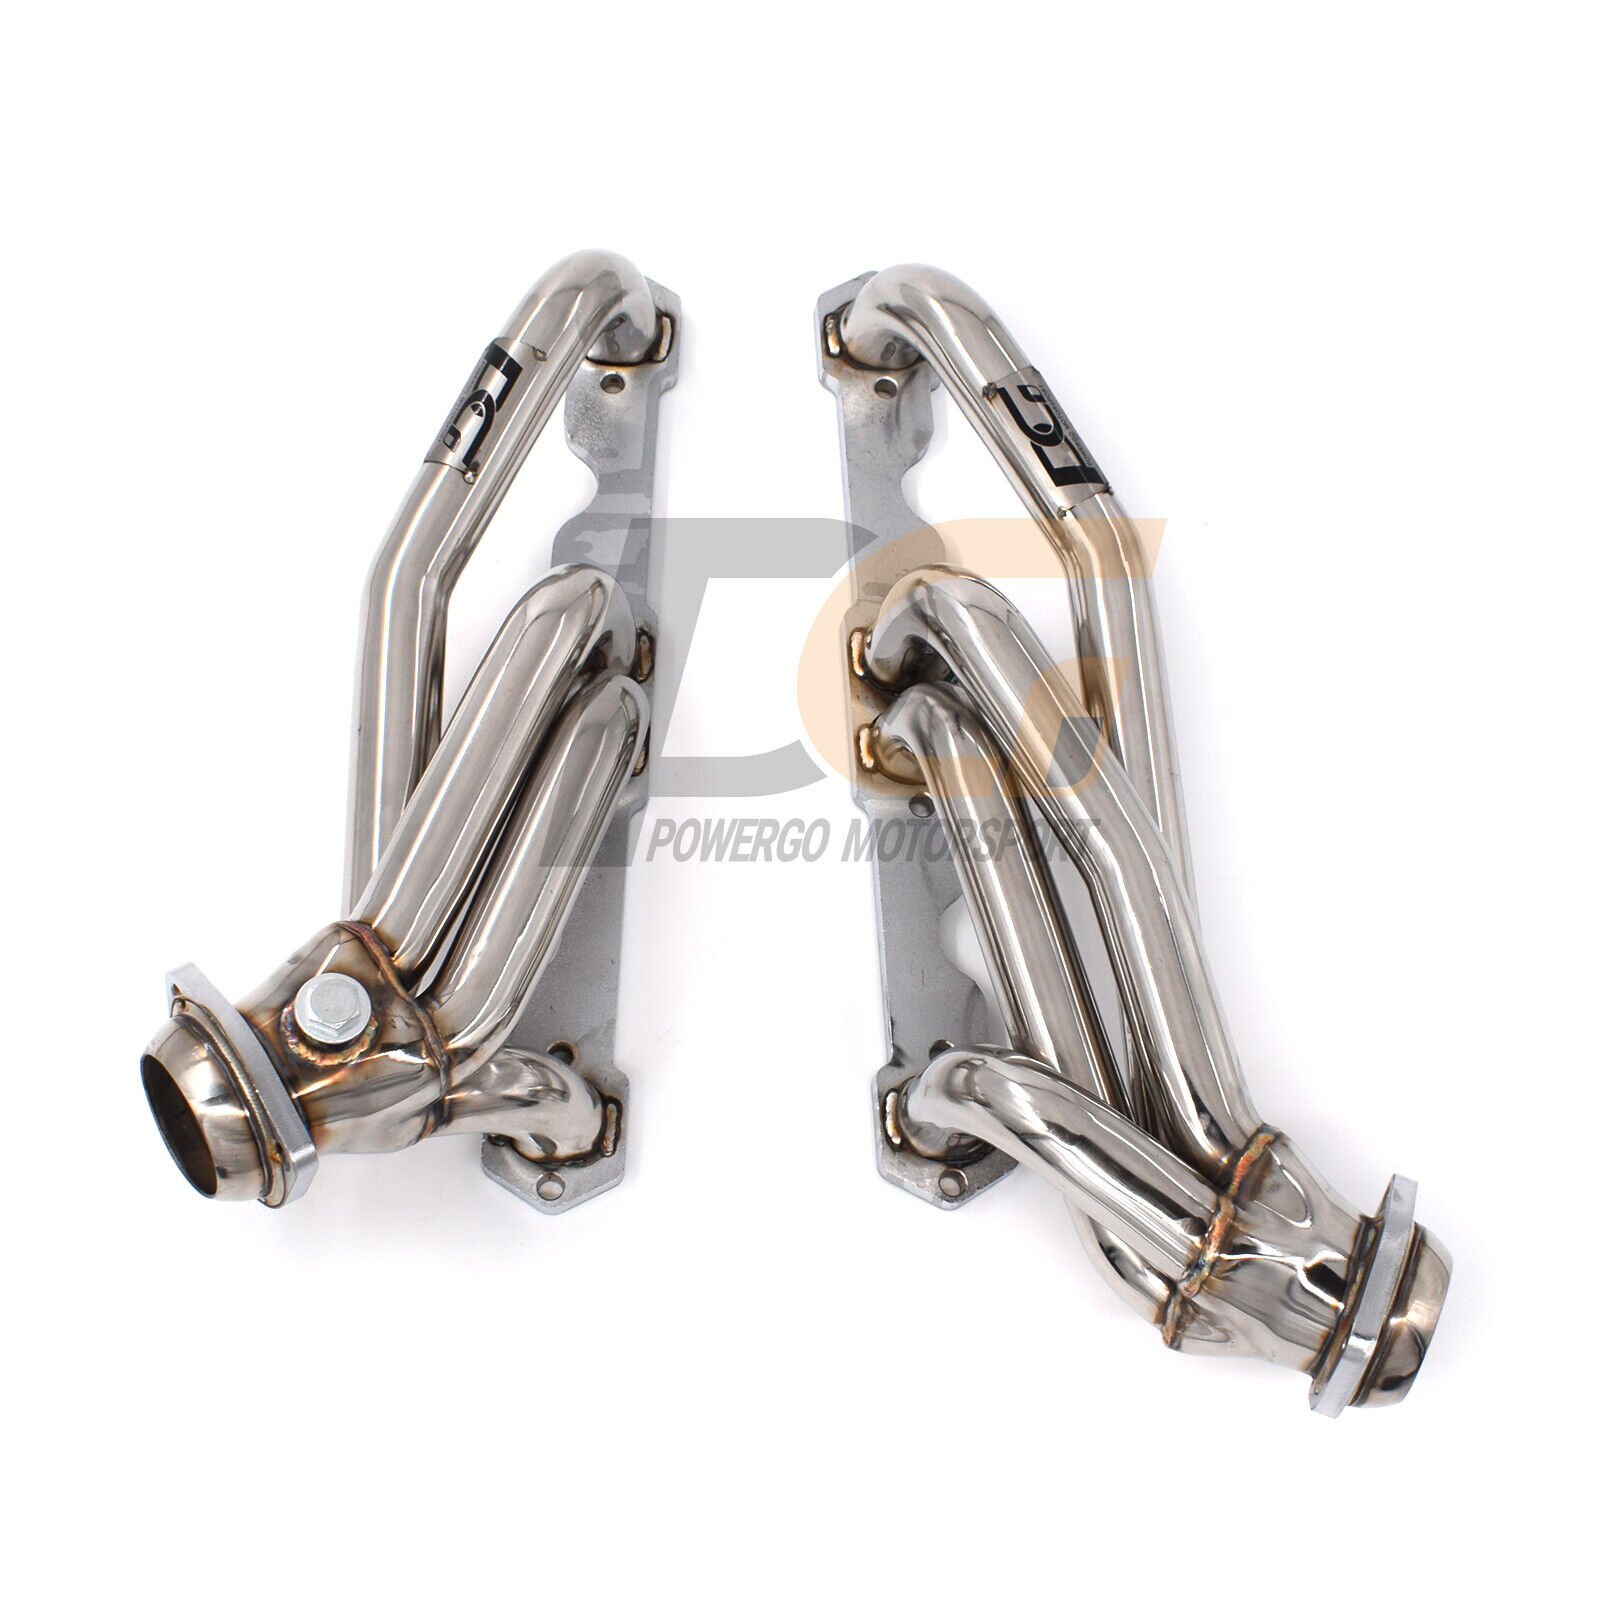 Shorty Headers for Chevy GMC 92-95 Tahoe Suburban Jimmy 305 350 5.0L 5.7L V8